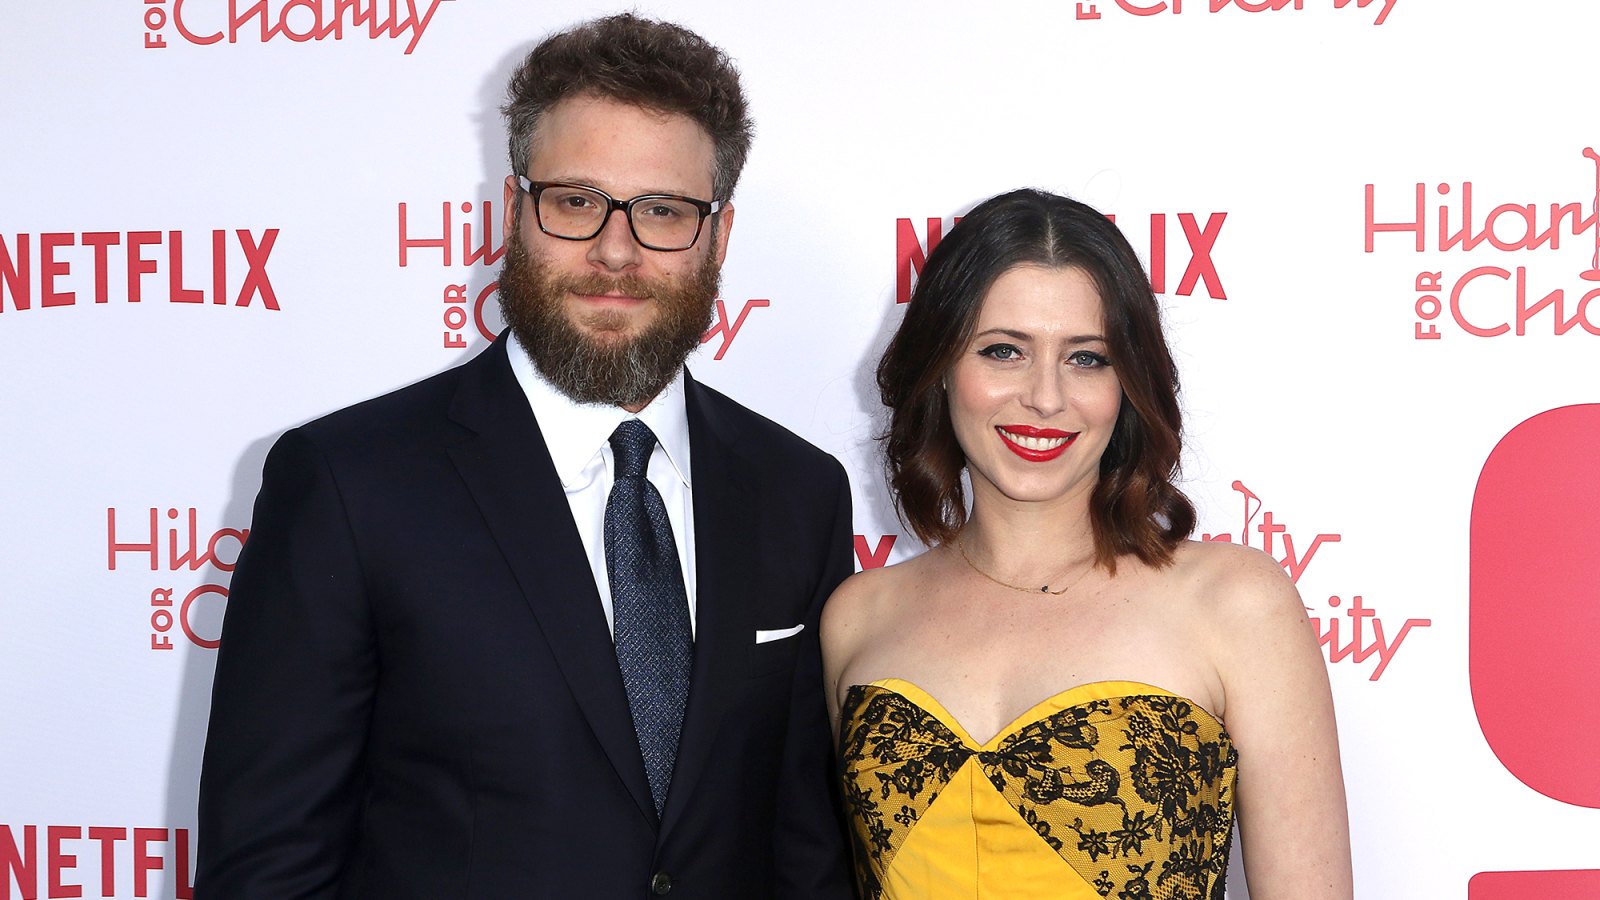 Seth Rogen and Lauren Miller’s Hilarity for Charity Has Been 'Formative’ in Their Relationship: ‘It’s Given Meaning and Purpose’ to Our Lives